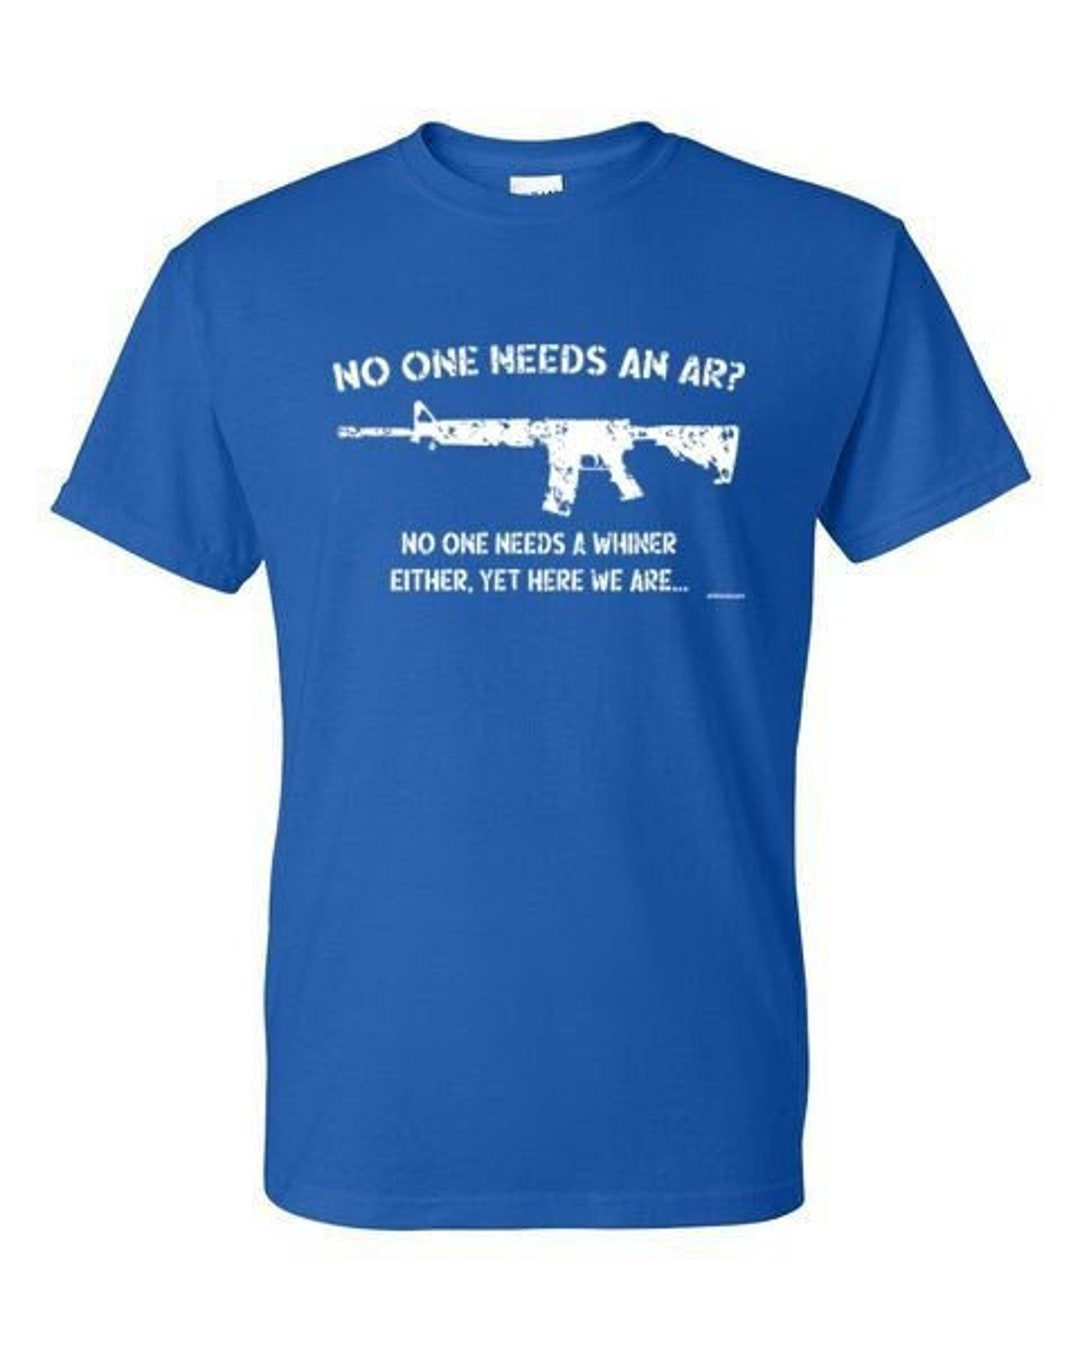 T-shirt NO ONE Needs an AR or a Whiner yet Here We Are - Etsy